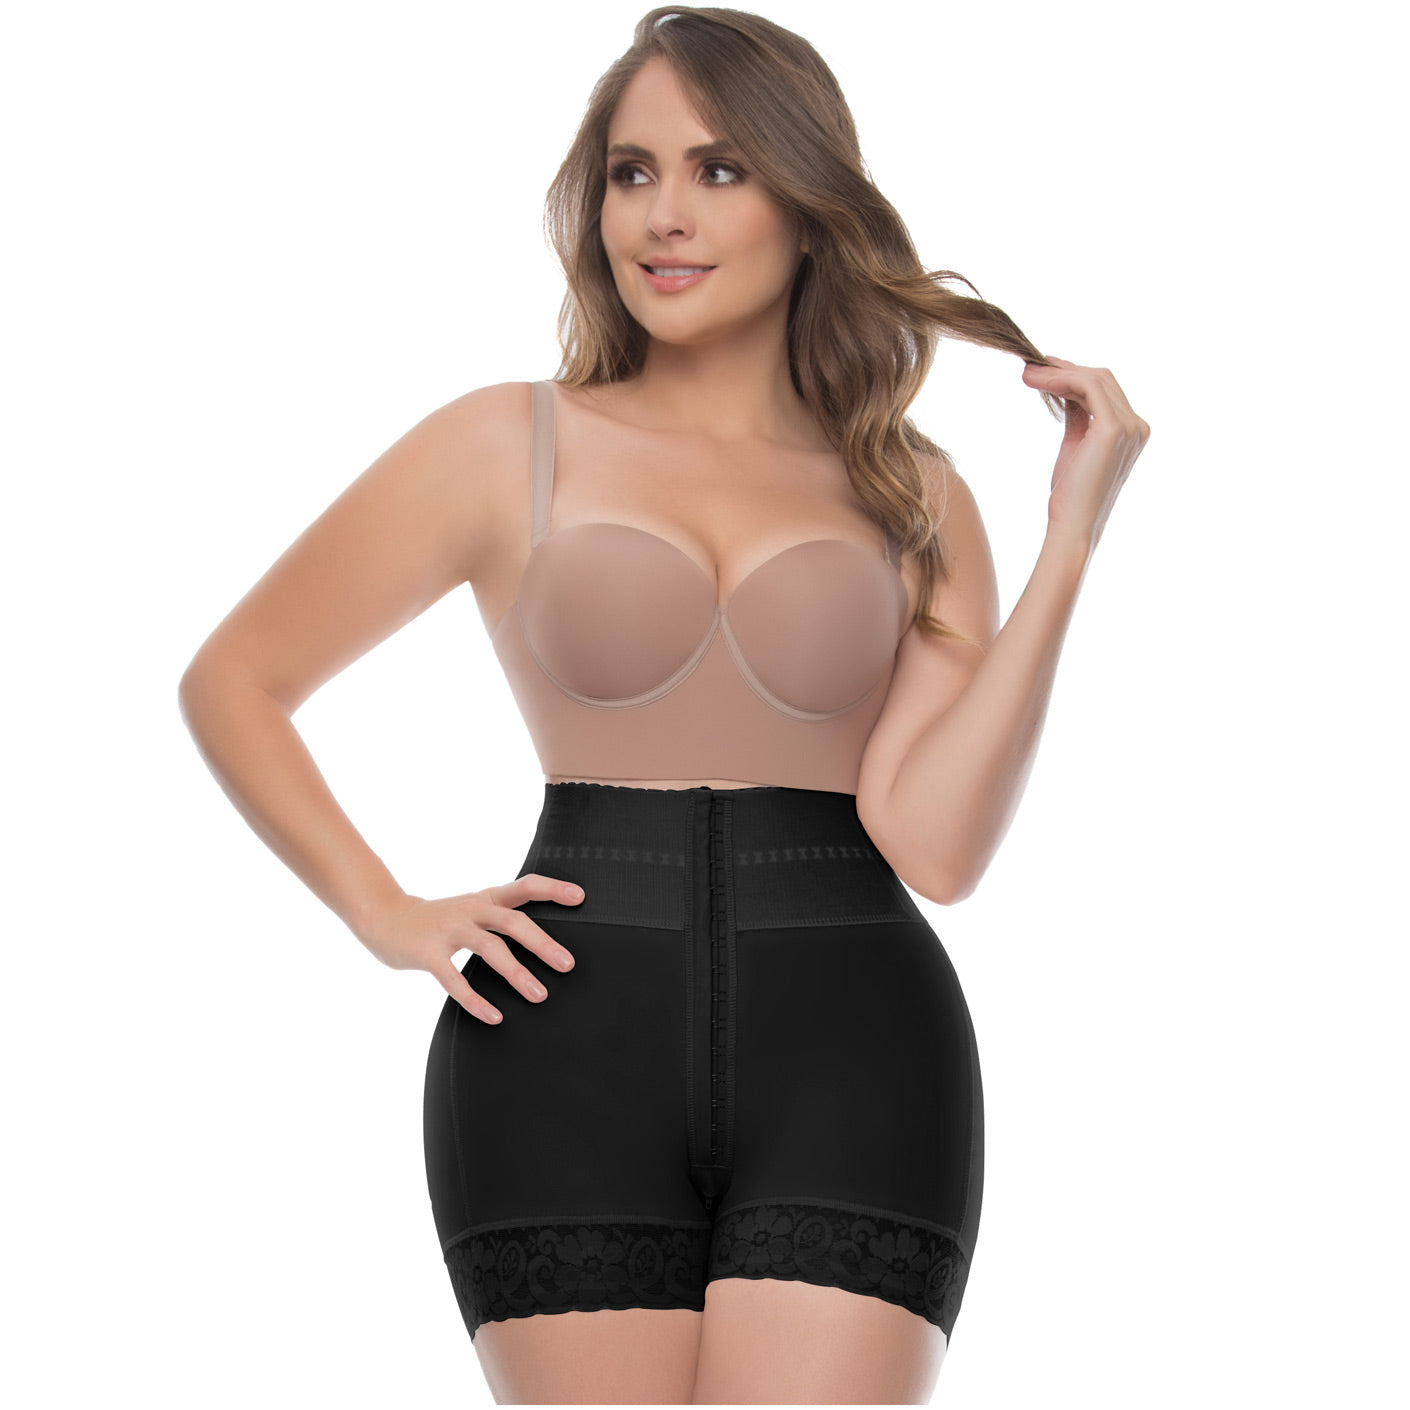 UpLady 6198 | Fajas Colombianas | Mid-Thigh Shaper Shorts with Tummy Control and Butt Lift